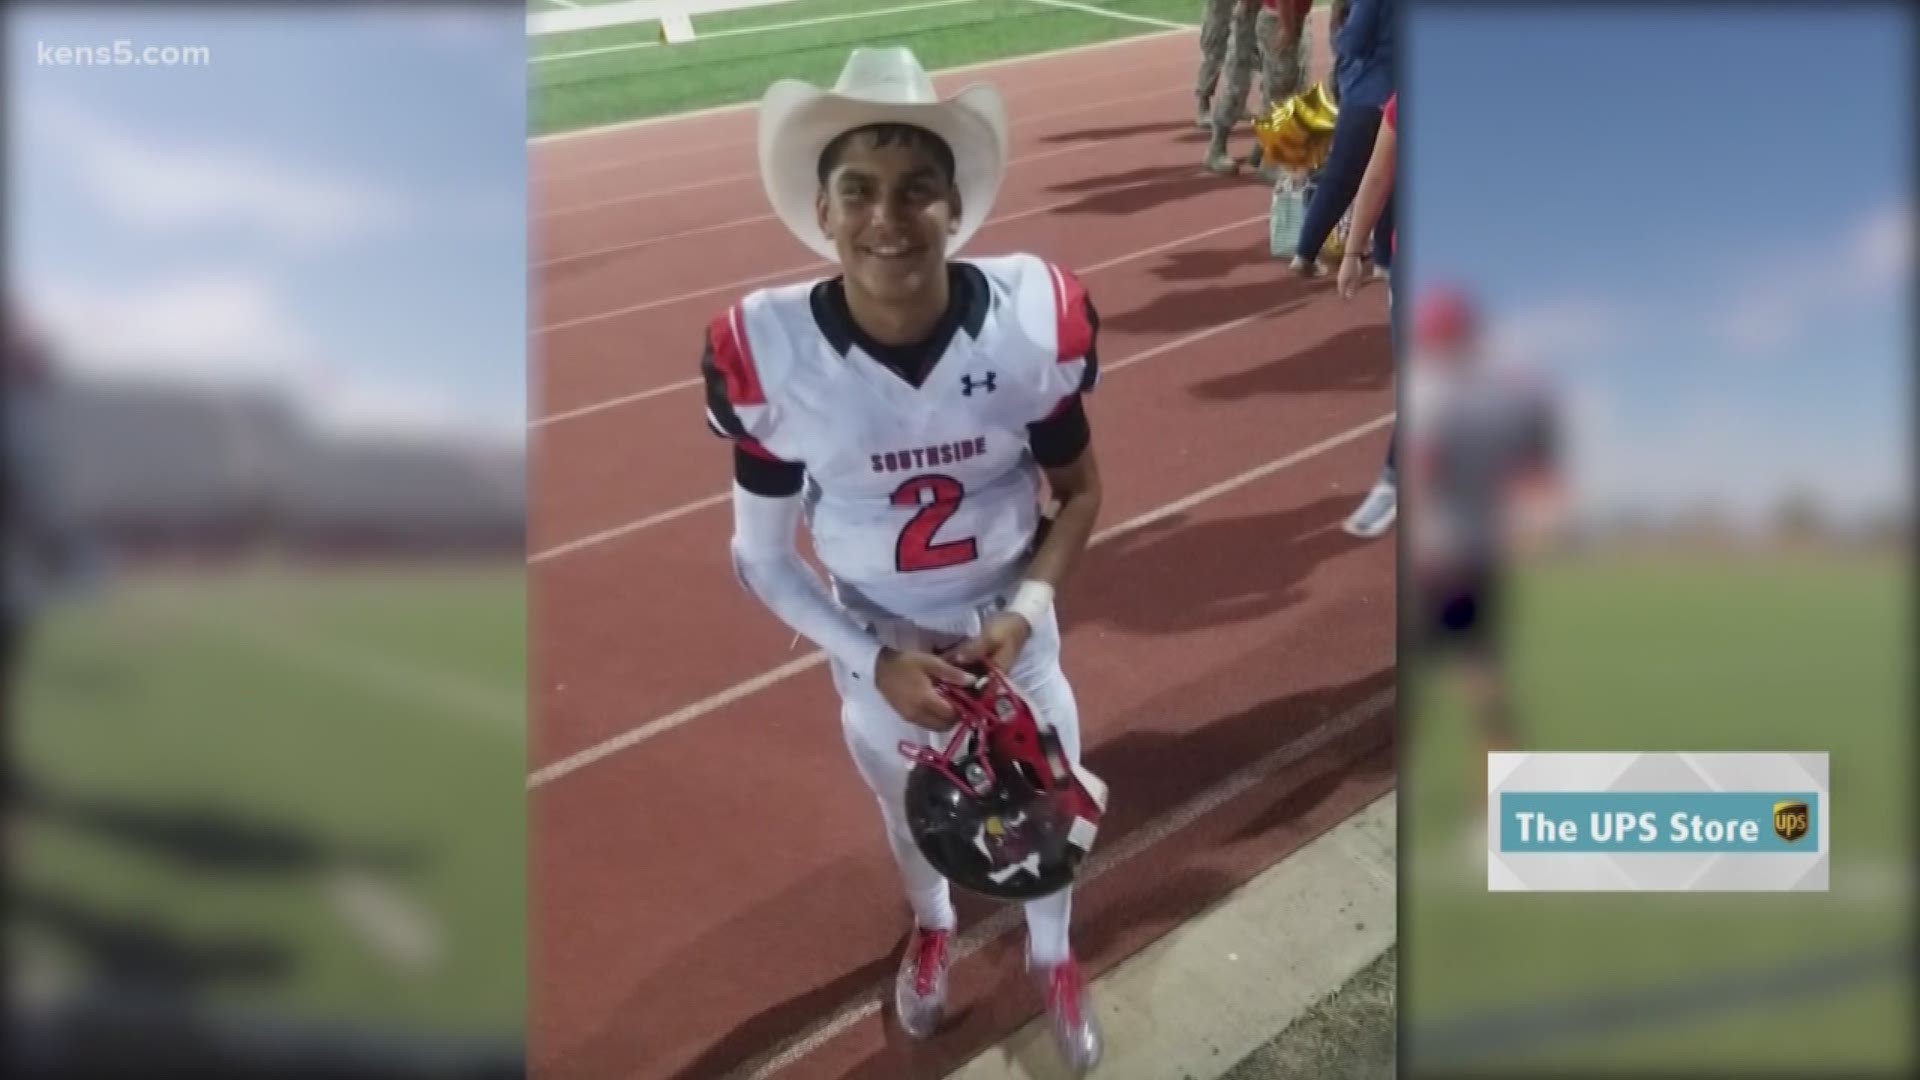 Senior quarterback Alejandro Escamilla has two homes. One on the turf and one on his parents' ranch. "I grew up on a saddle. My dad had me on the saddle before I could walk and I've been riding ever since," Escamilla said.